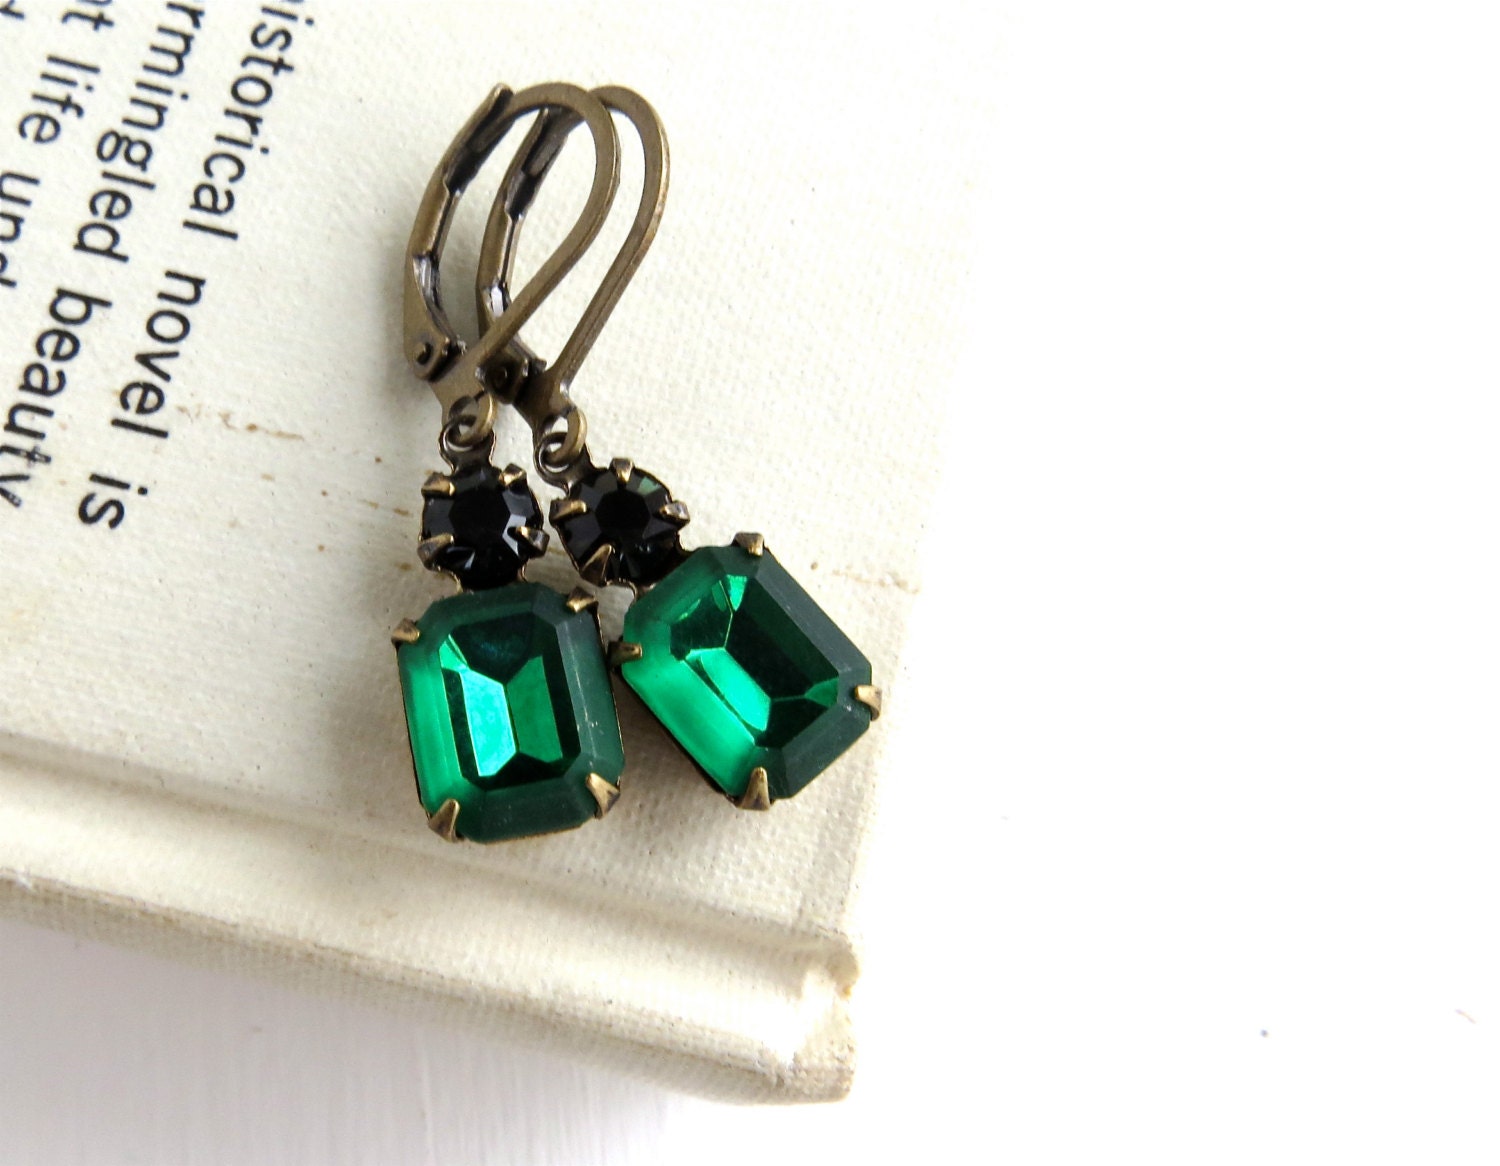 Emerald Green Earrings - black, antique brass, vintage inspired, estate style, old hollywood glamour - OhNostalgiaDesigns